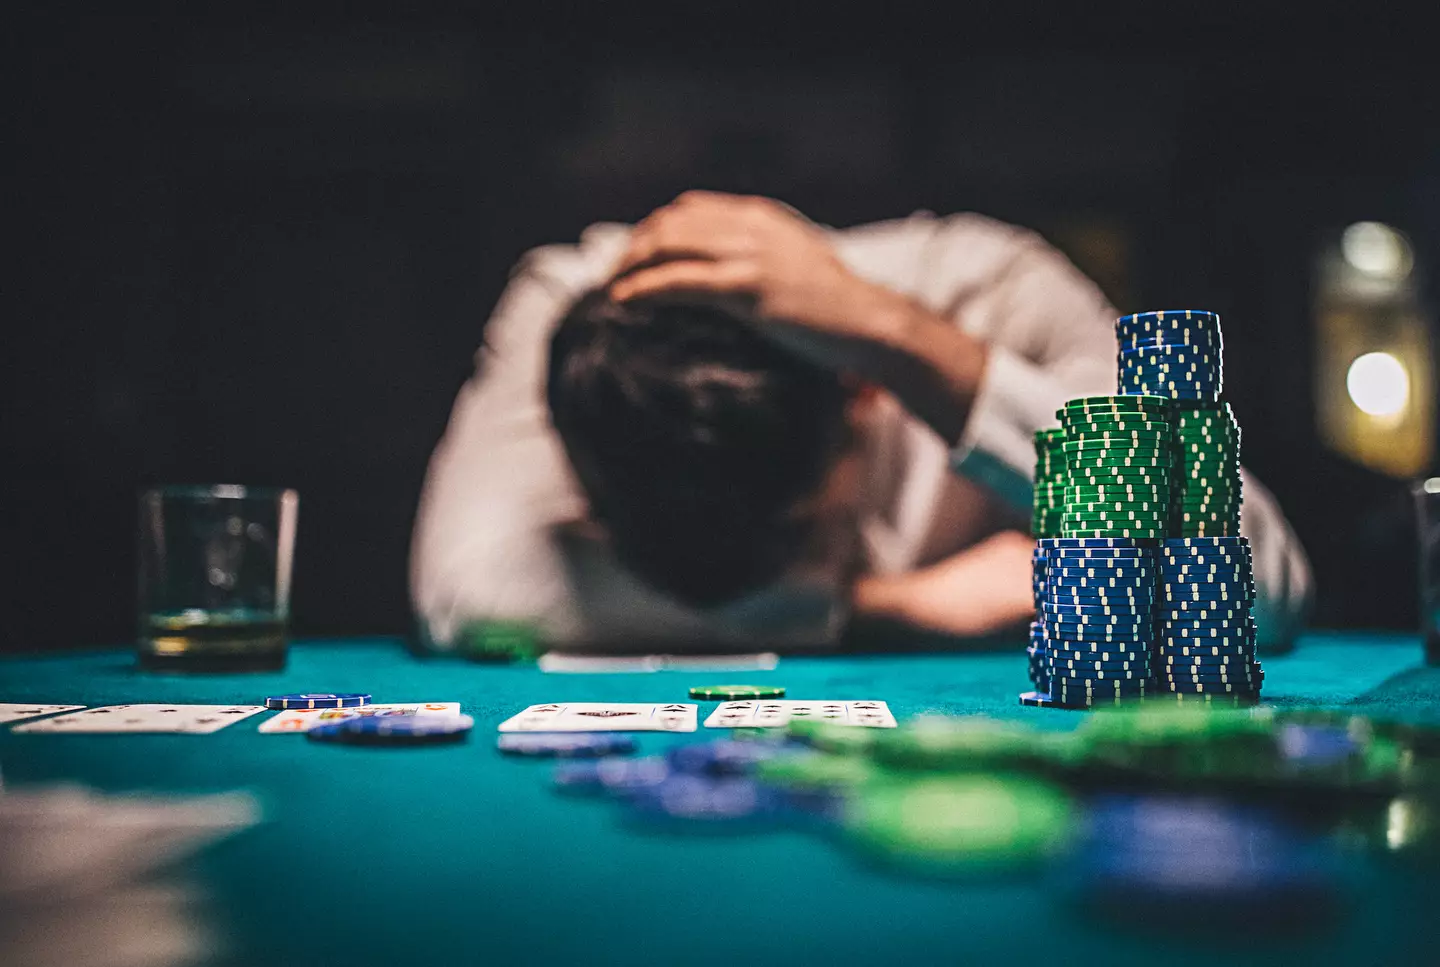 The casino employee also gave other insights into the industry. (Getty Stock Image)